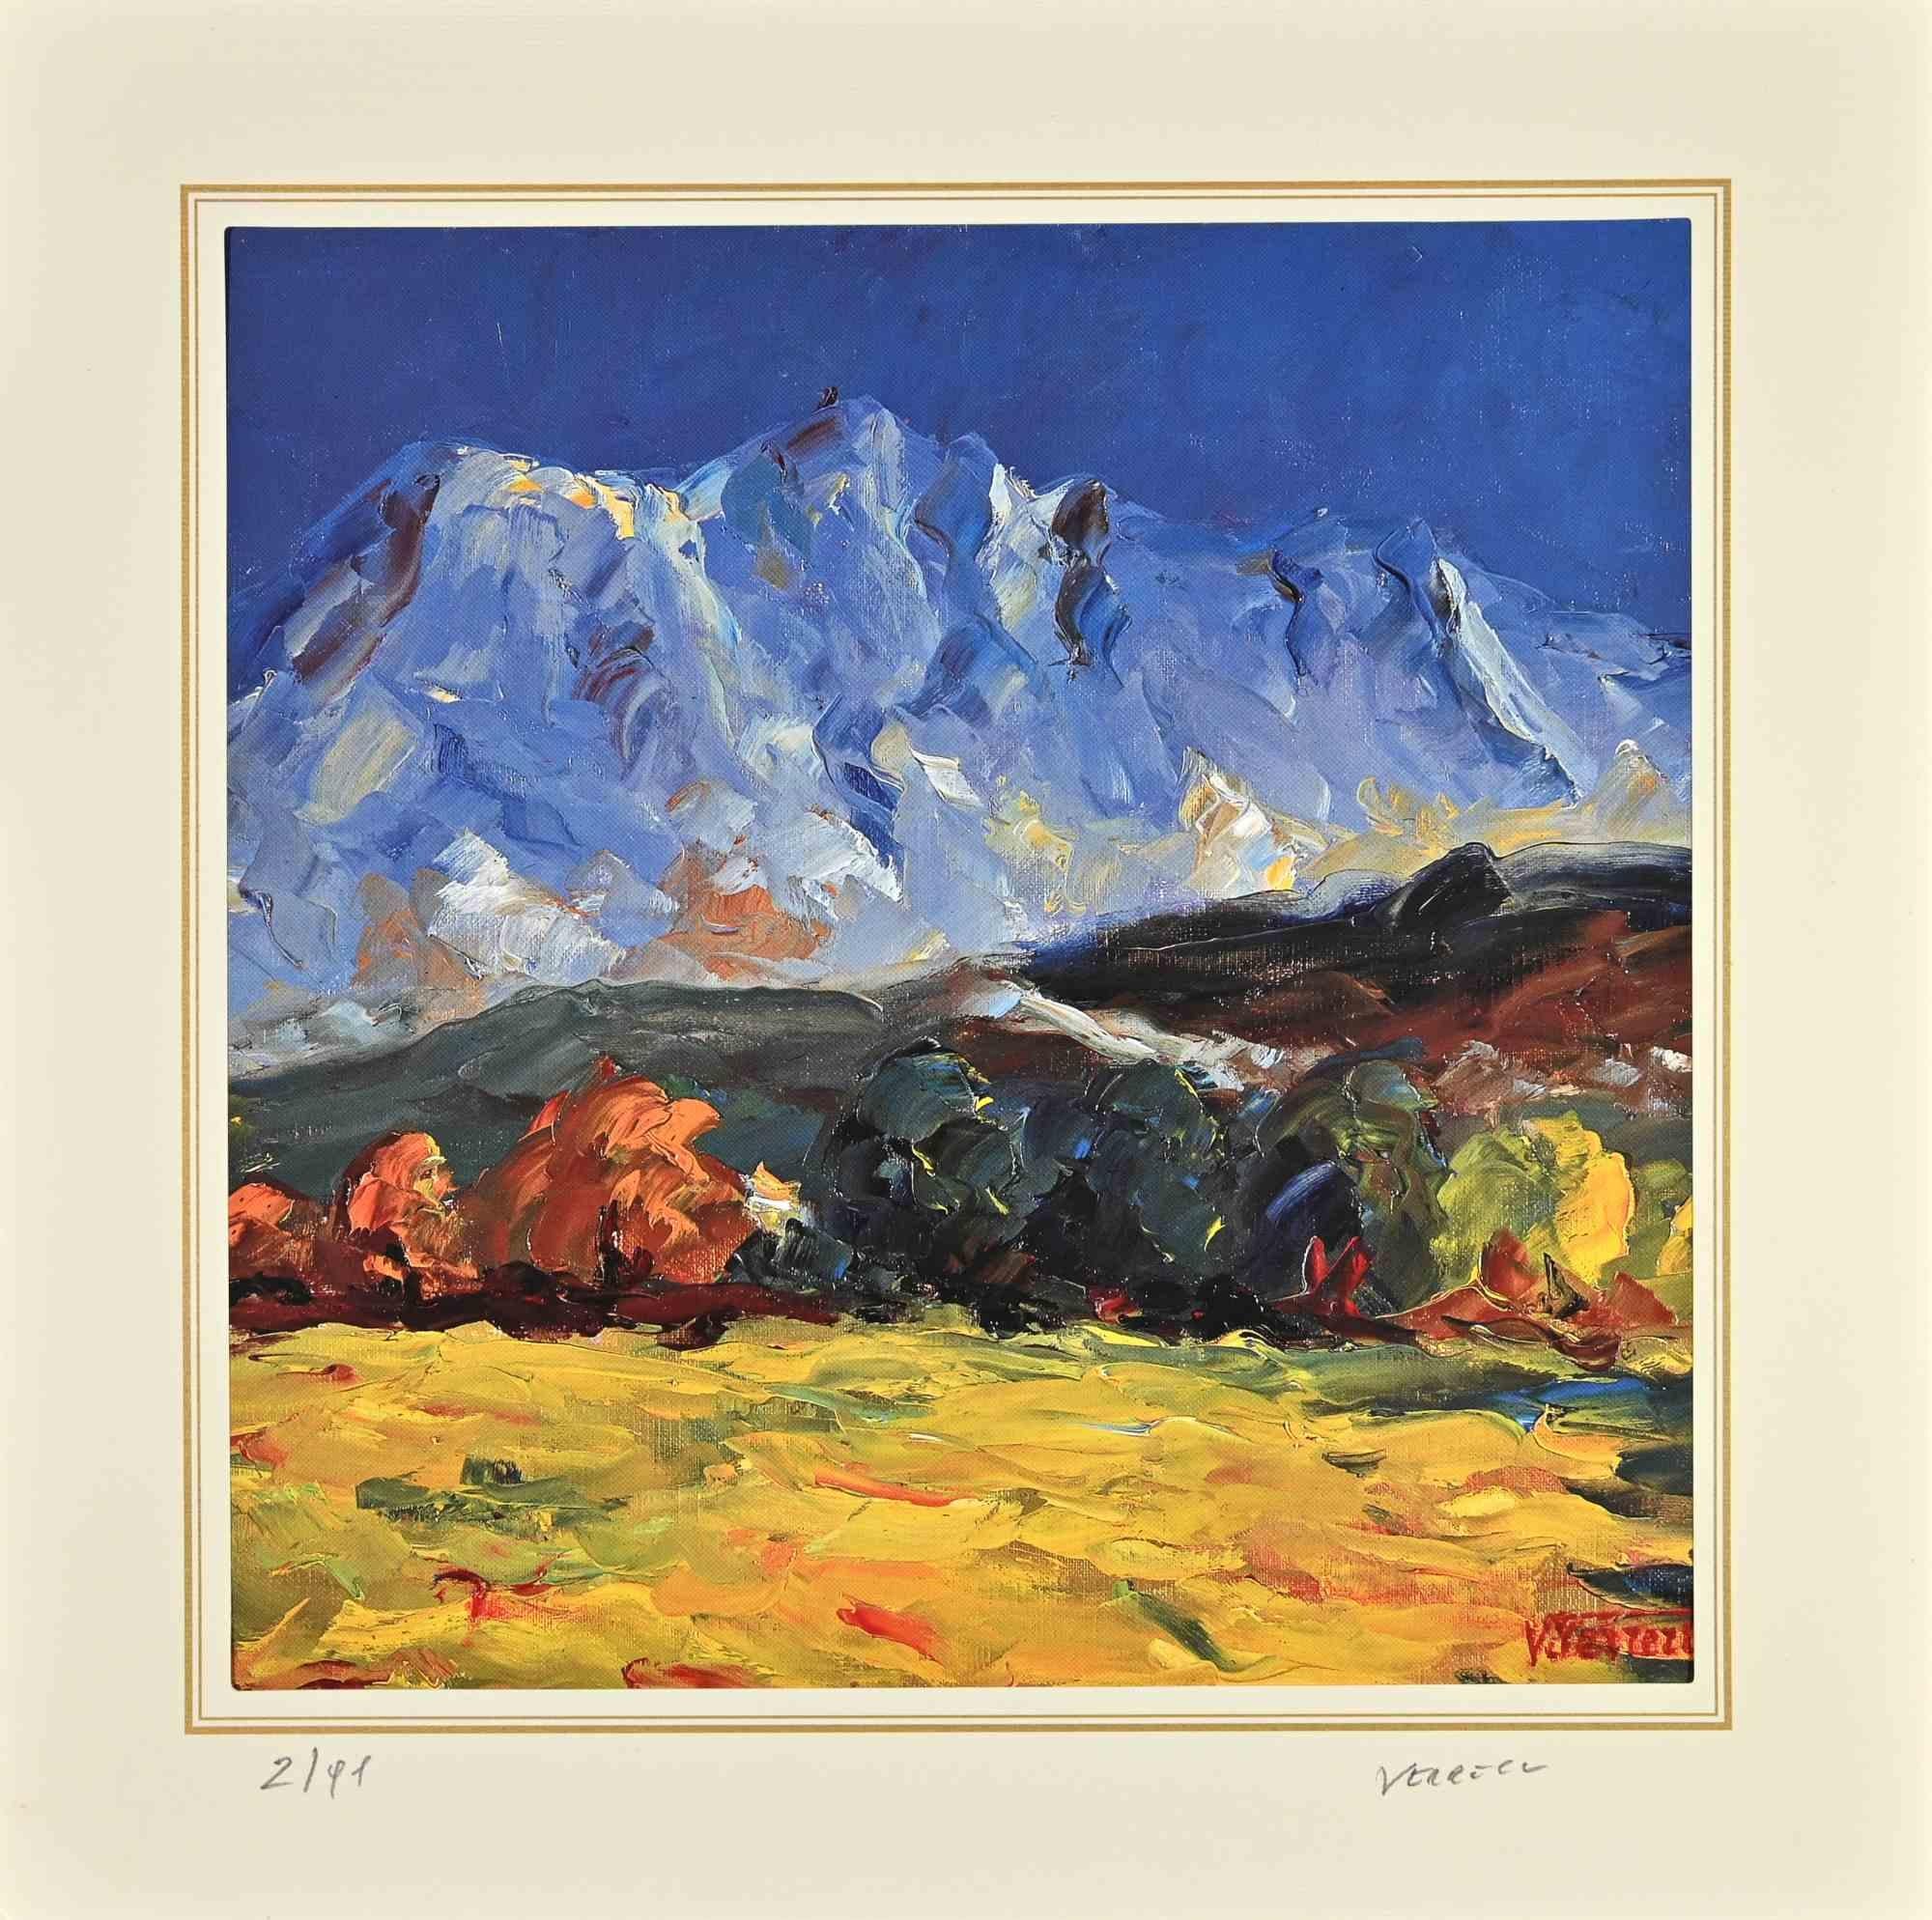  Landscape  with mountains is a lithograph attributed to Nicholas Verrall (1945)  in the Late 20th Century.

Hand-signed on the right corner. Numbered, Edition, 2/99, on the left margin. On the back is the label of the certificate of 